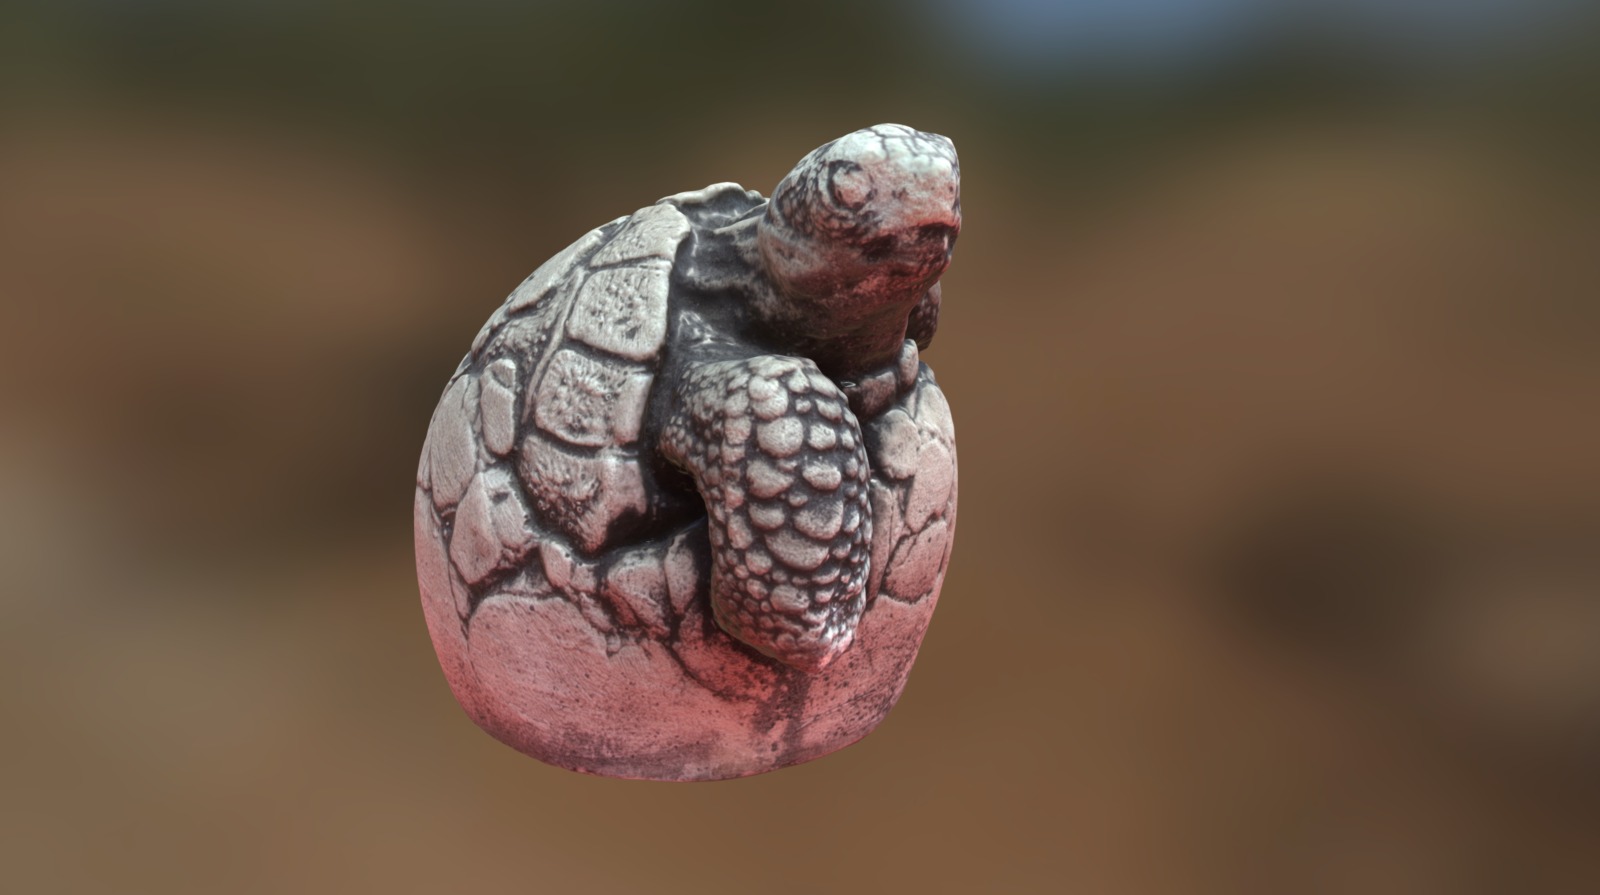 A turlte stone statue bought from australia a couple of years back - Turtle Stone Statue - 3D model by alexng1990 3d model